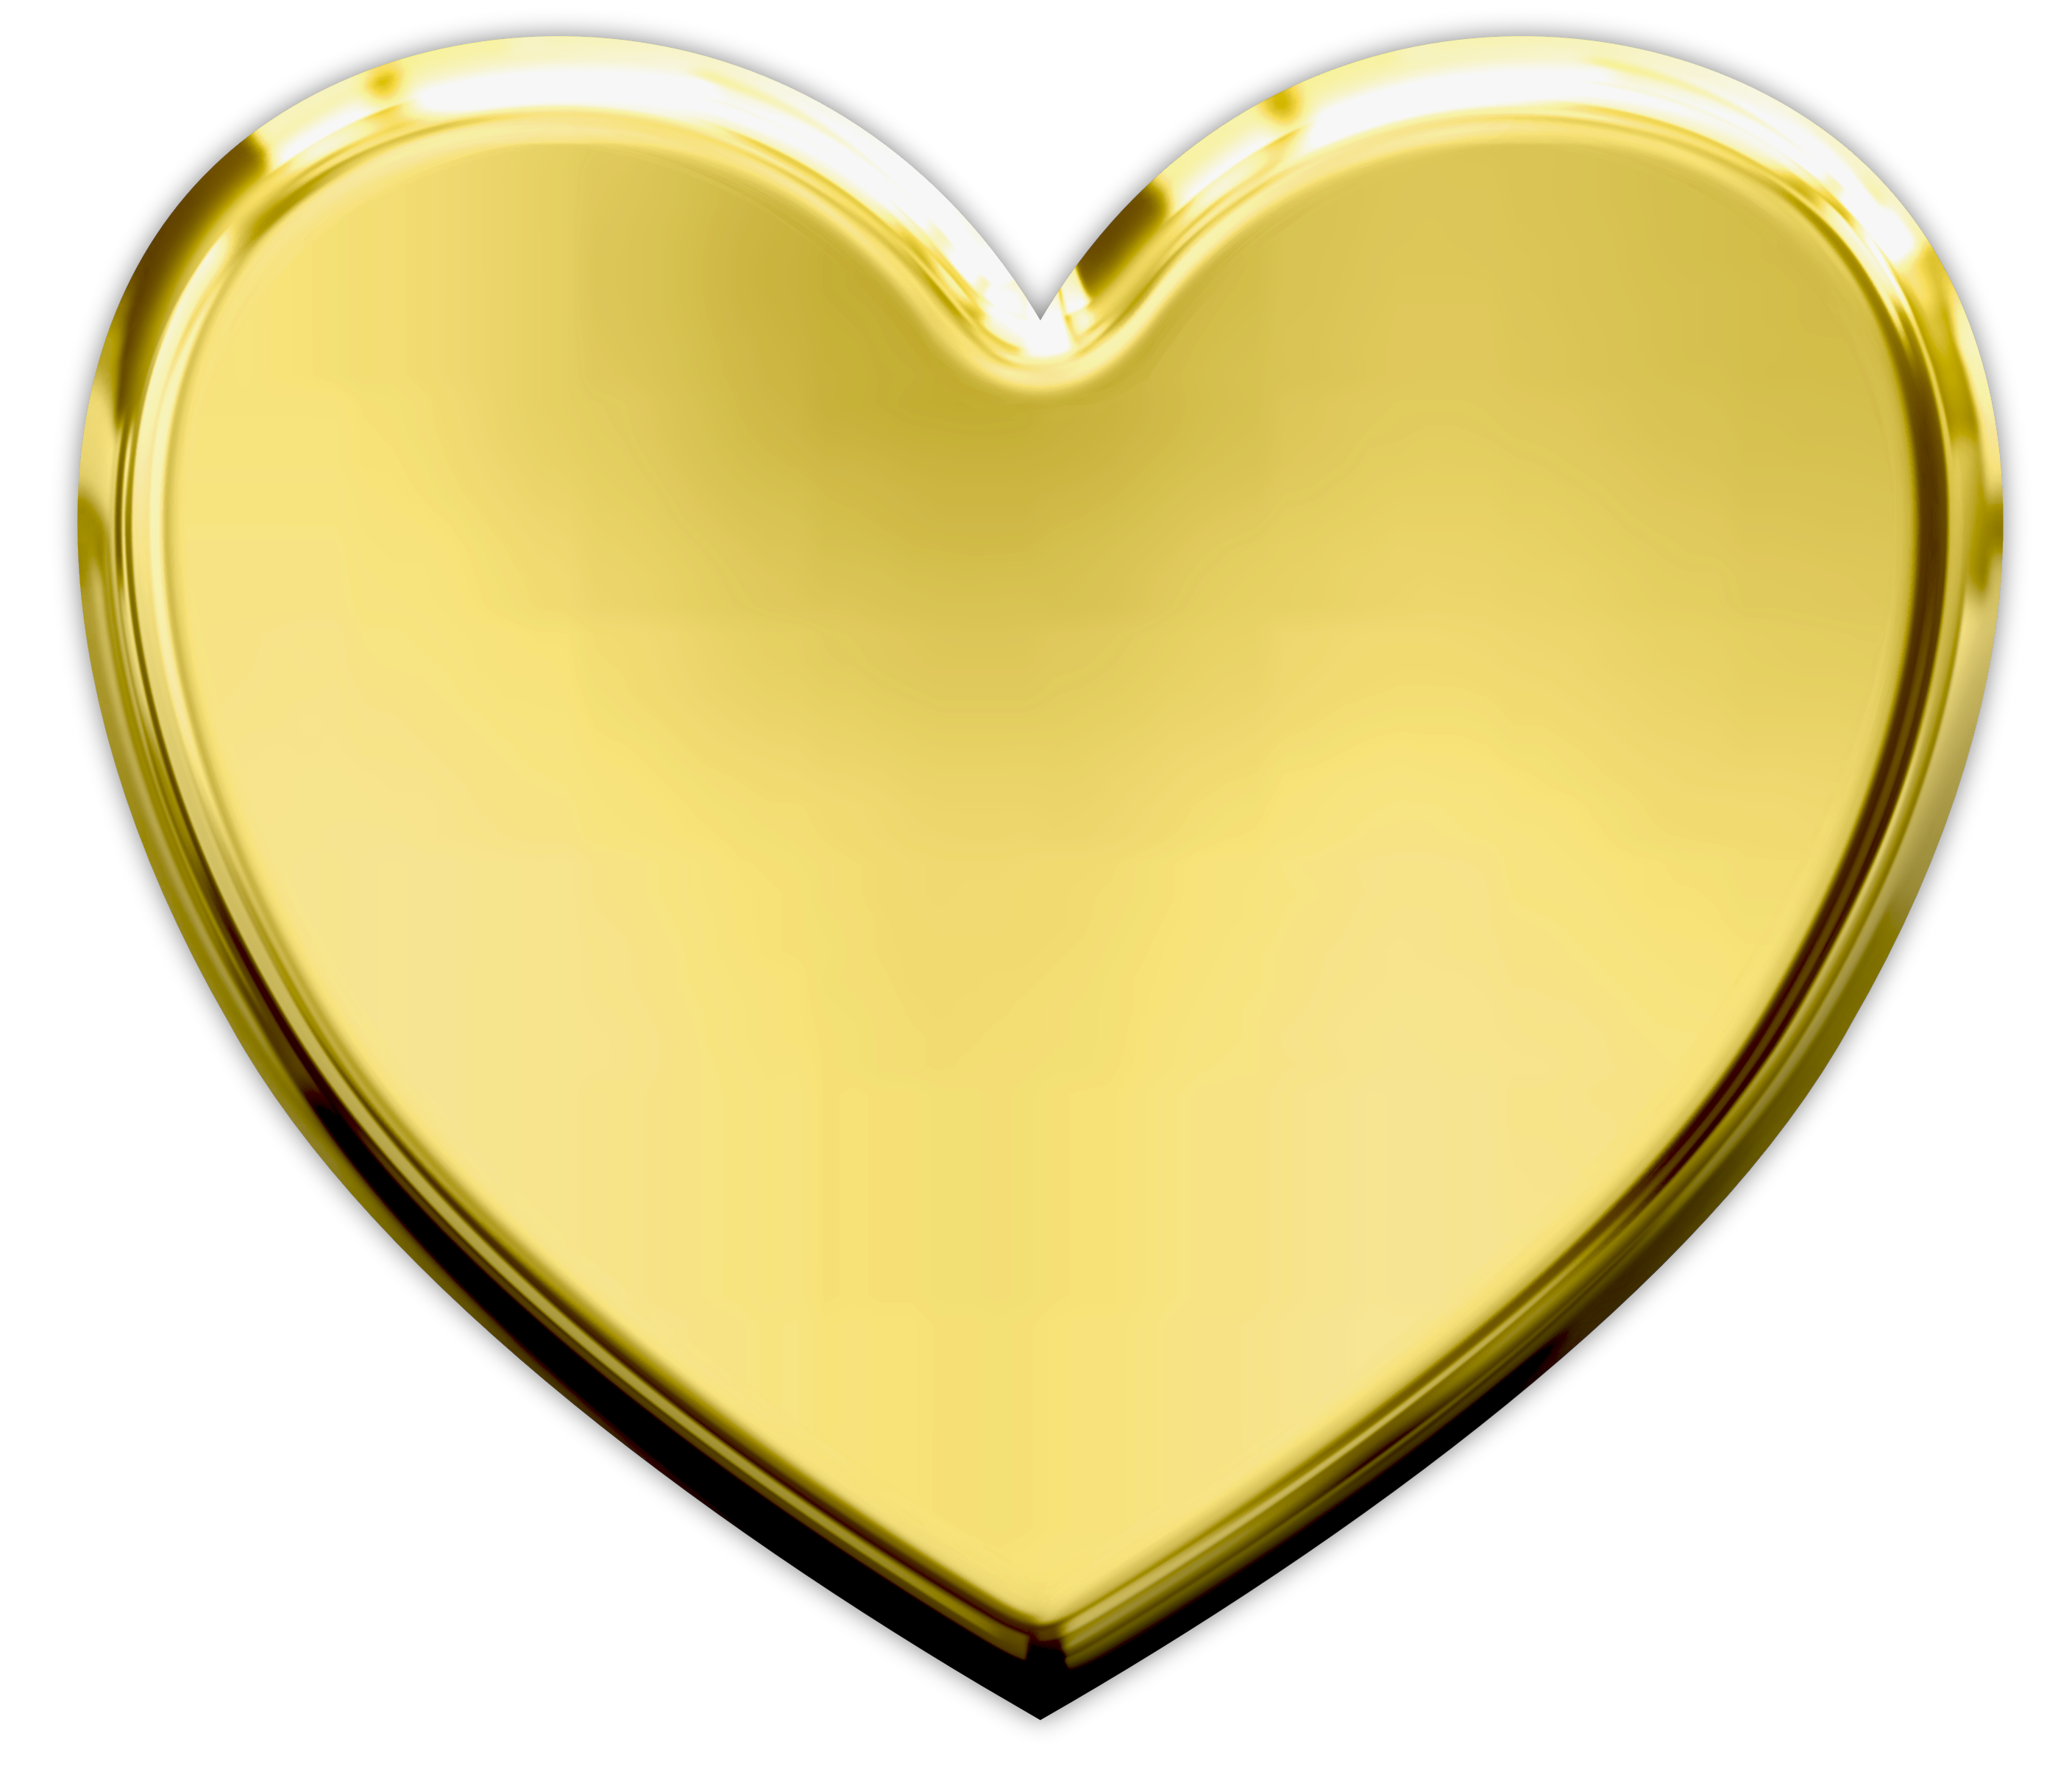 A Gold Heart On A Black Background